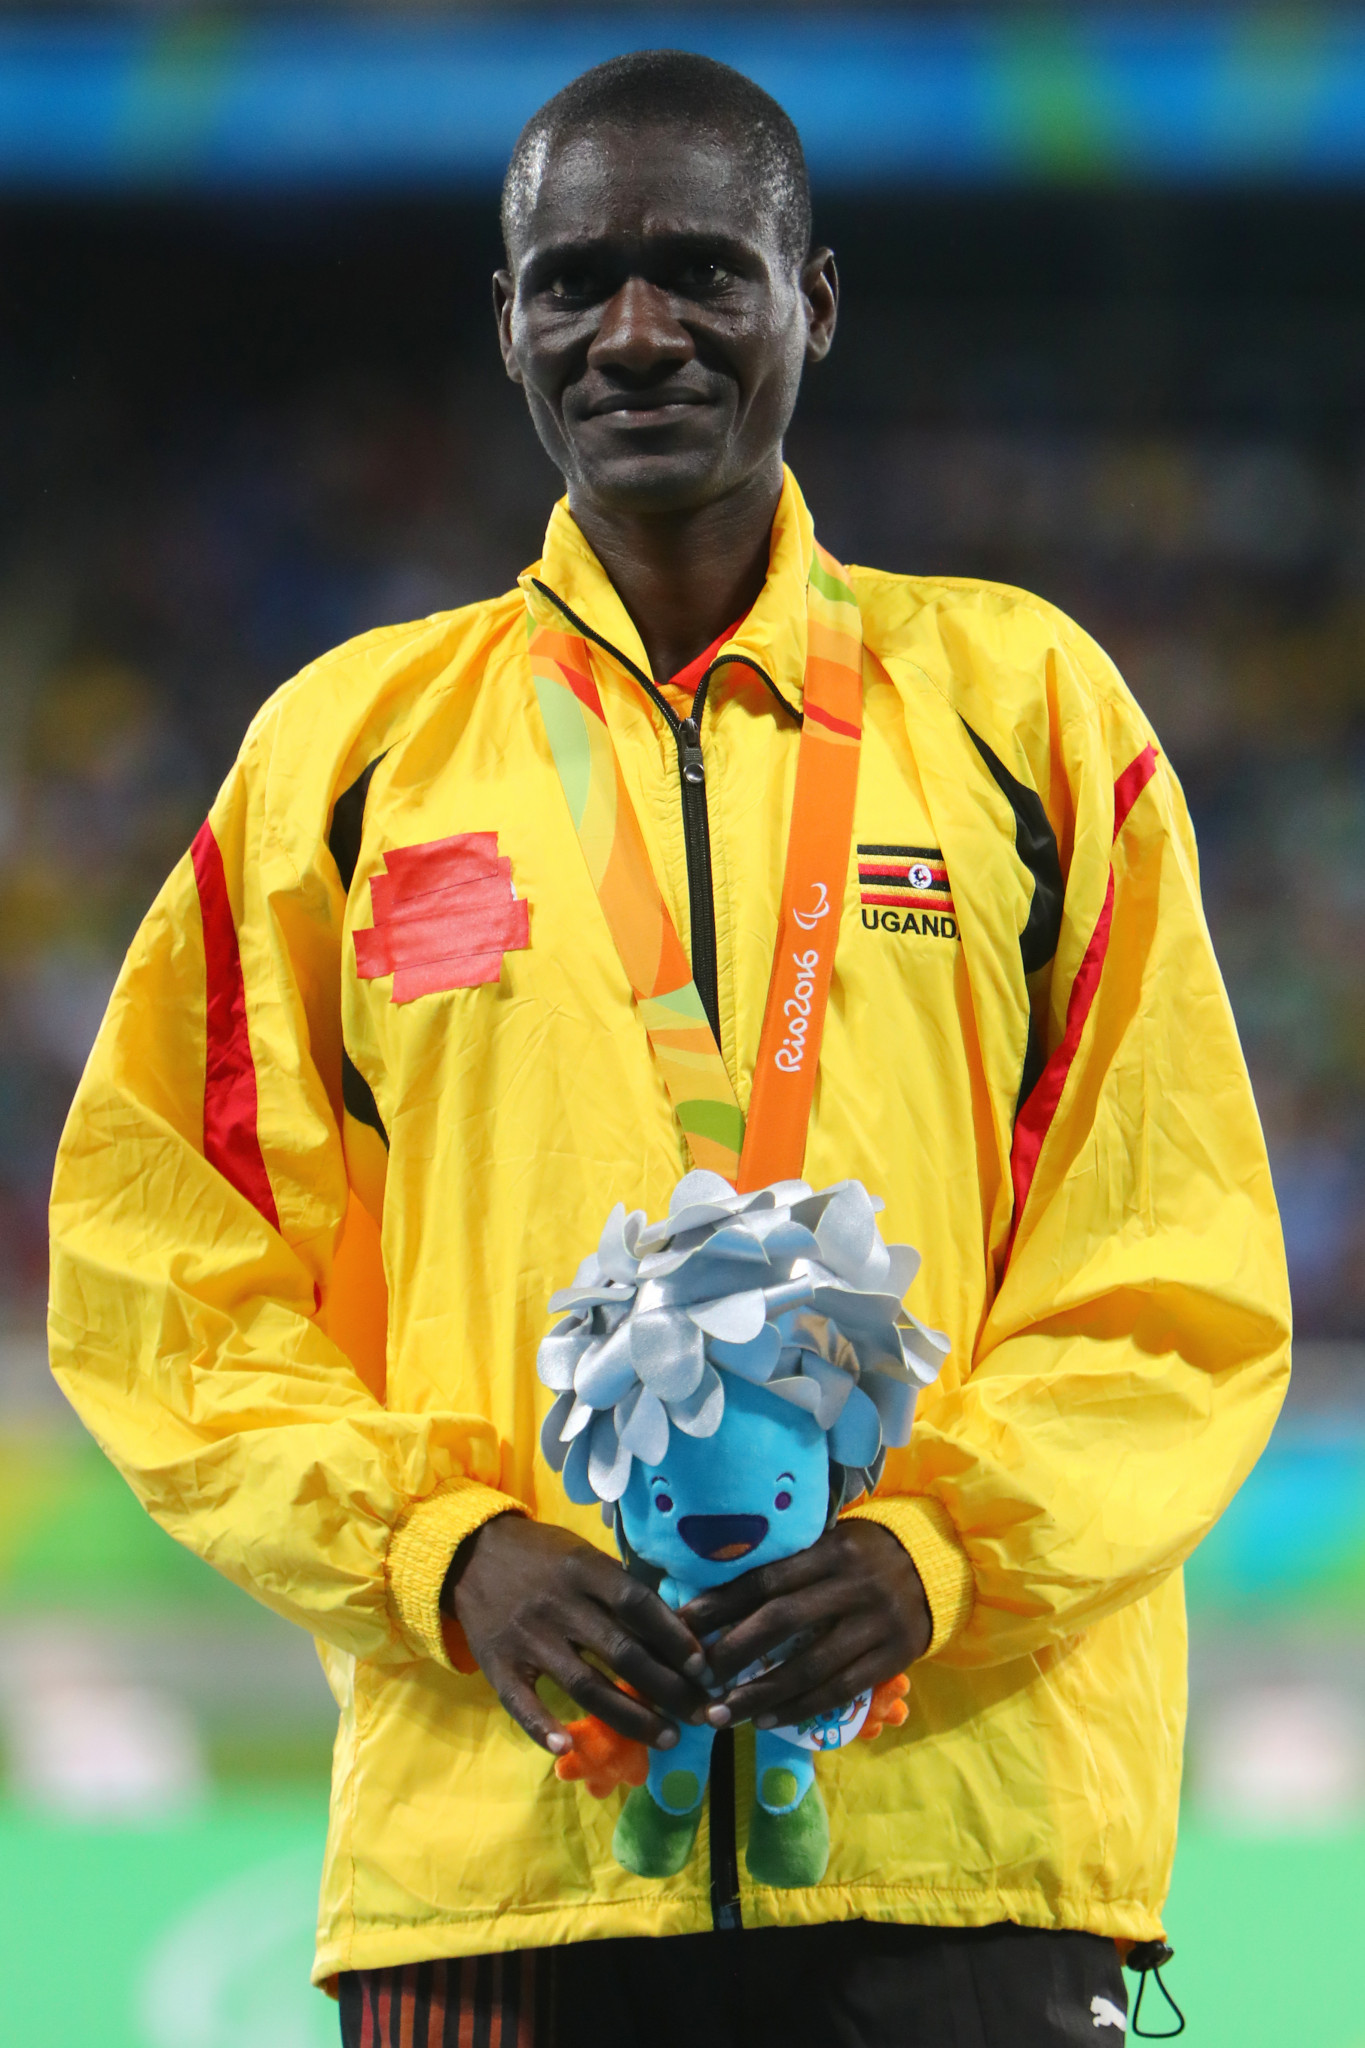 David Emong is the only Paralympic athlete from Uganda to earn medals, a silver at Rio 2016 and bronze at Tokyo 2020, both in the 1500m ©Getty Images